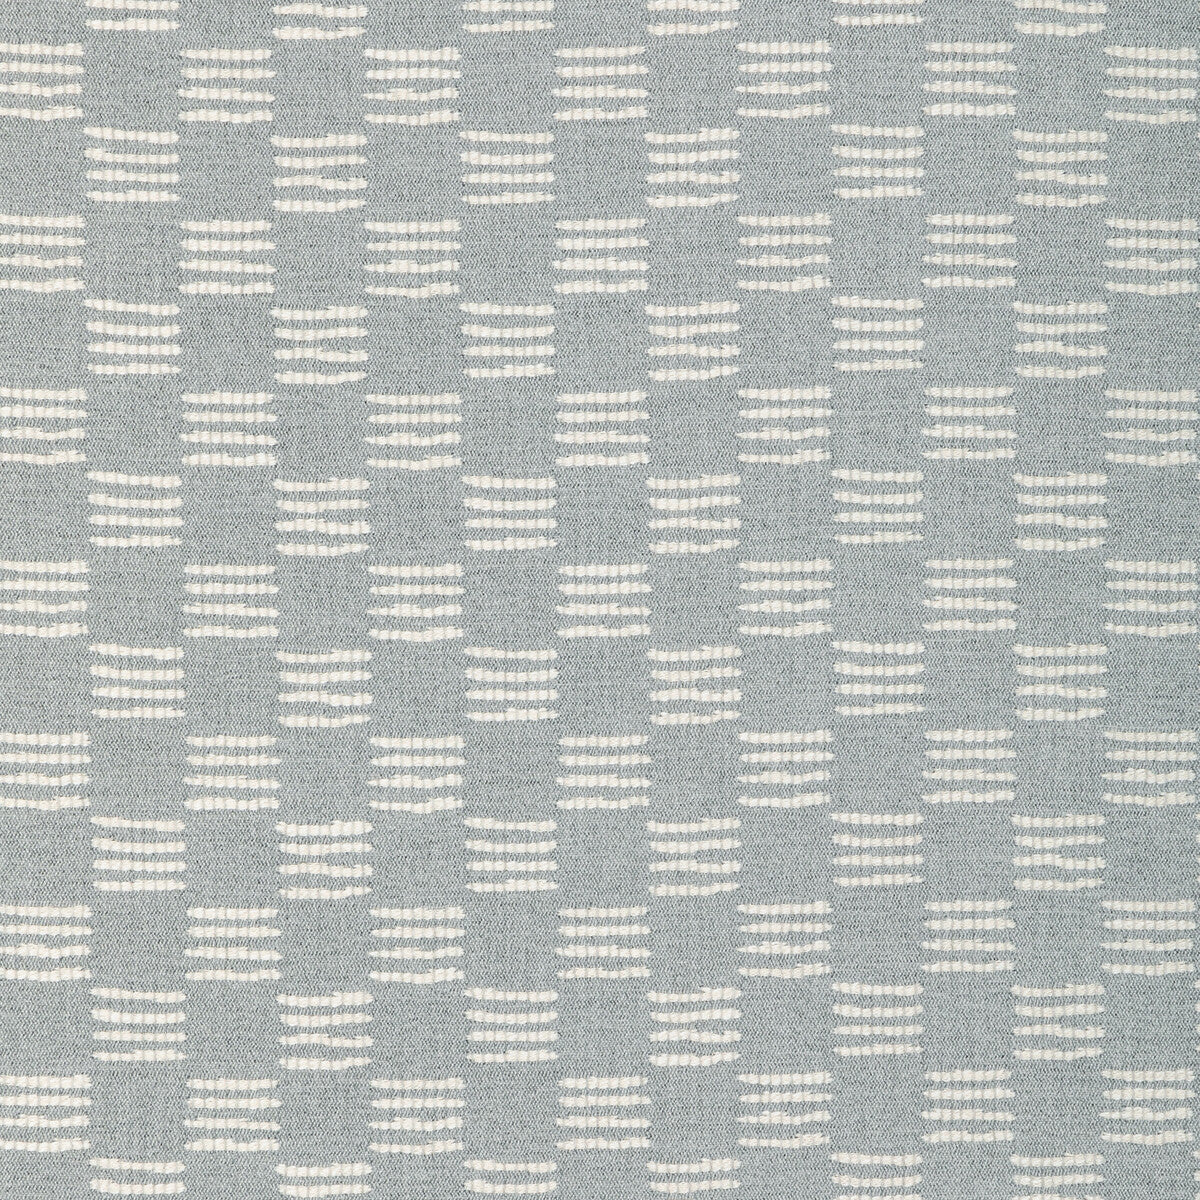 Stroll fabric in frost color - pattern GWF-3785.1311.0 - by Lee Jofa Modern in the Kelly Wearstler Oculum Indoor/Outdoor collection